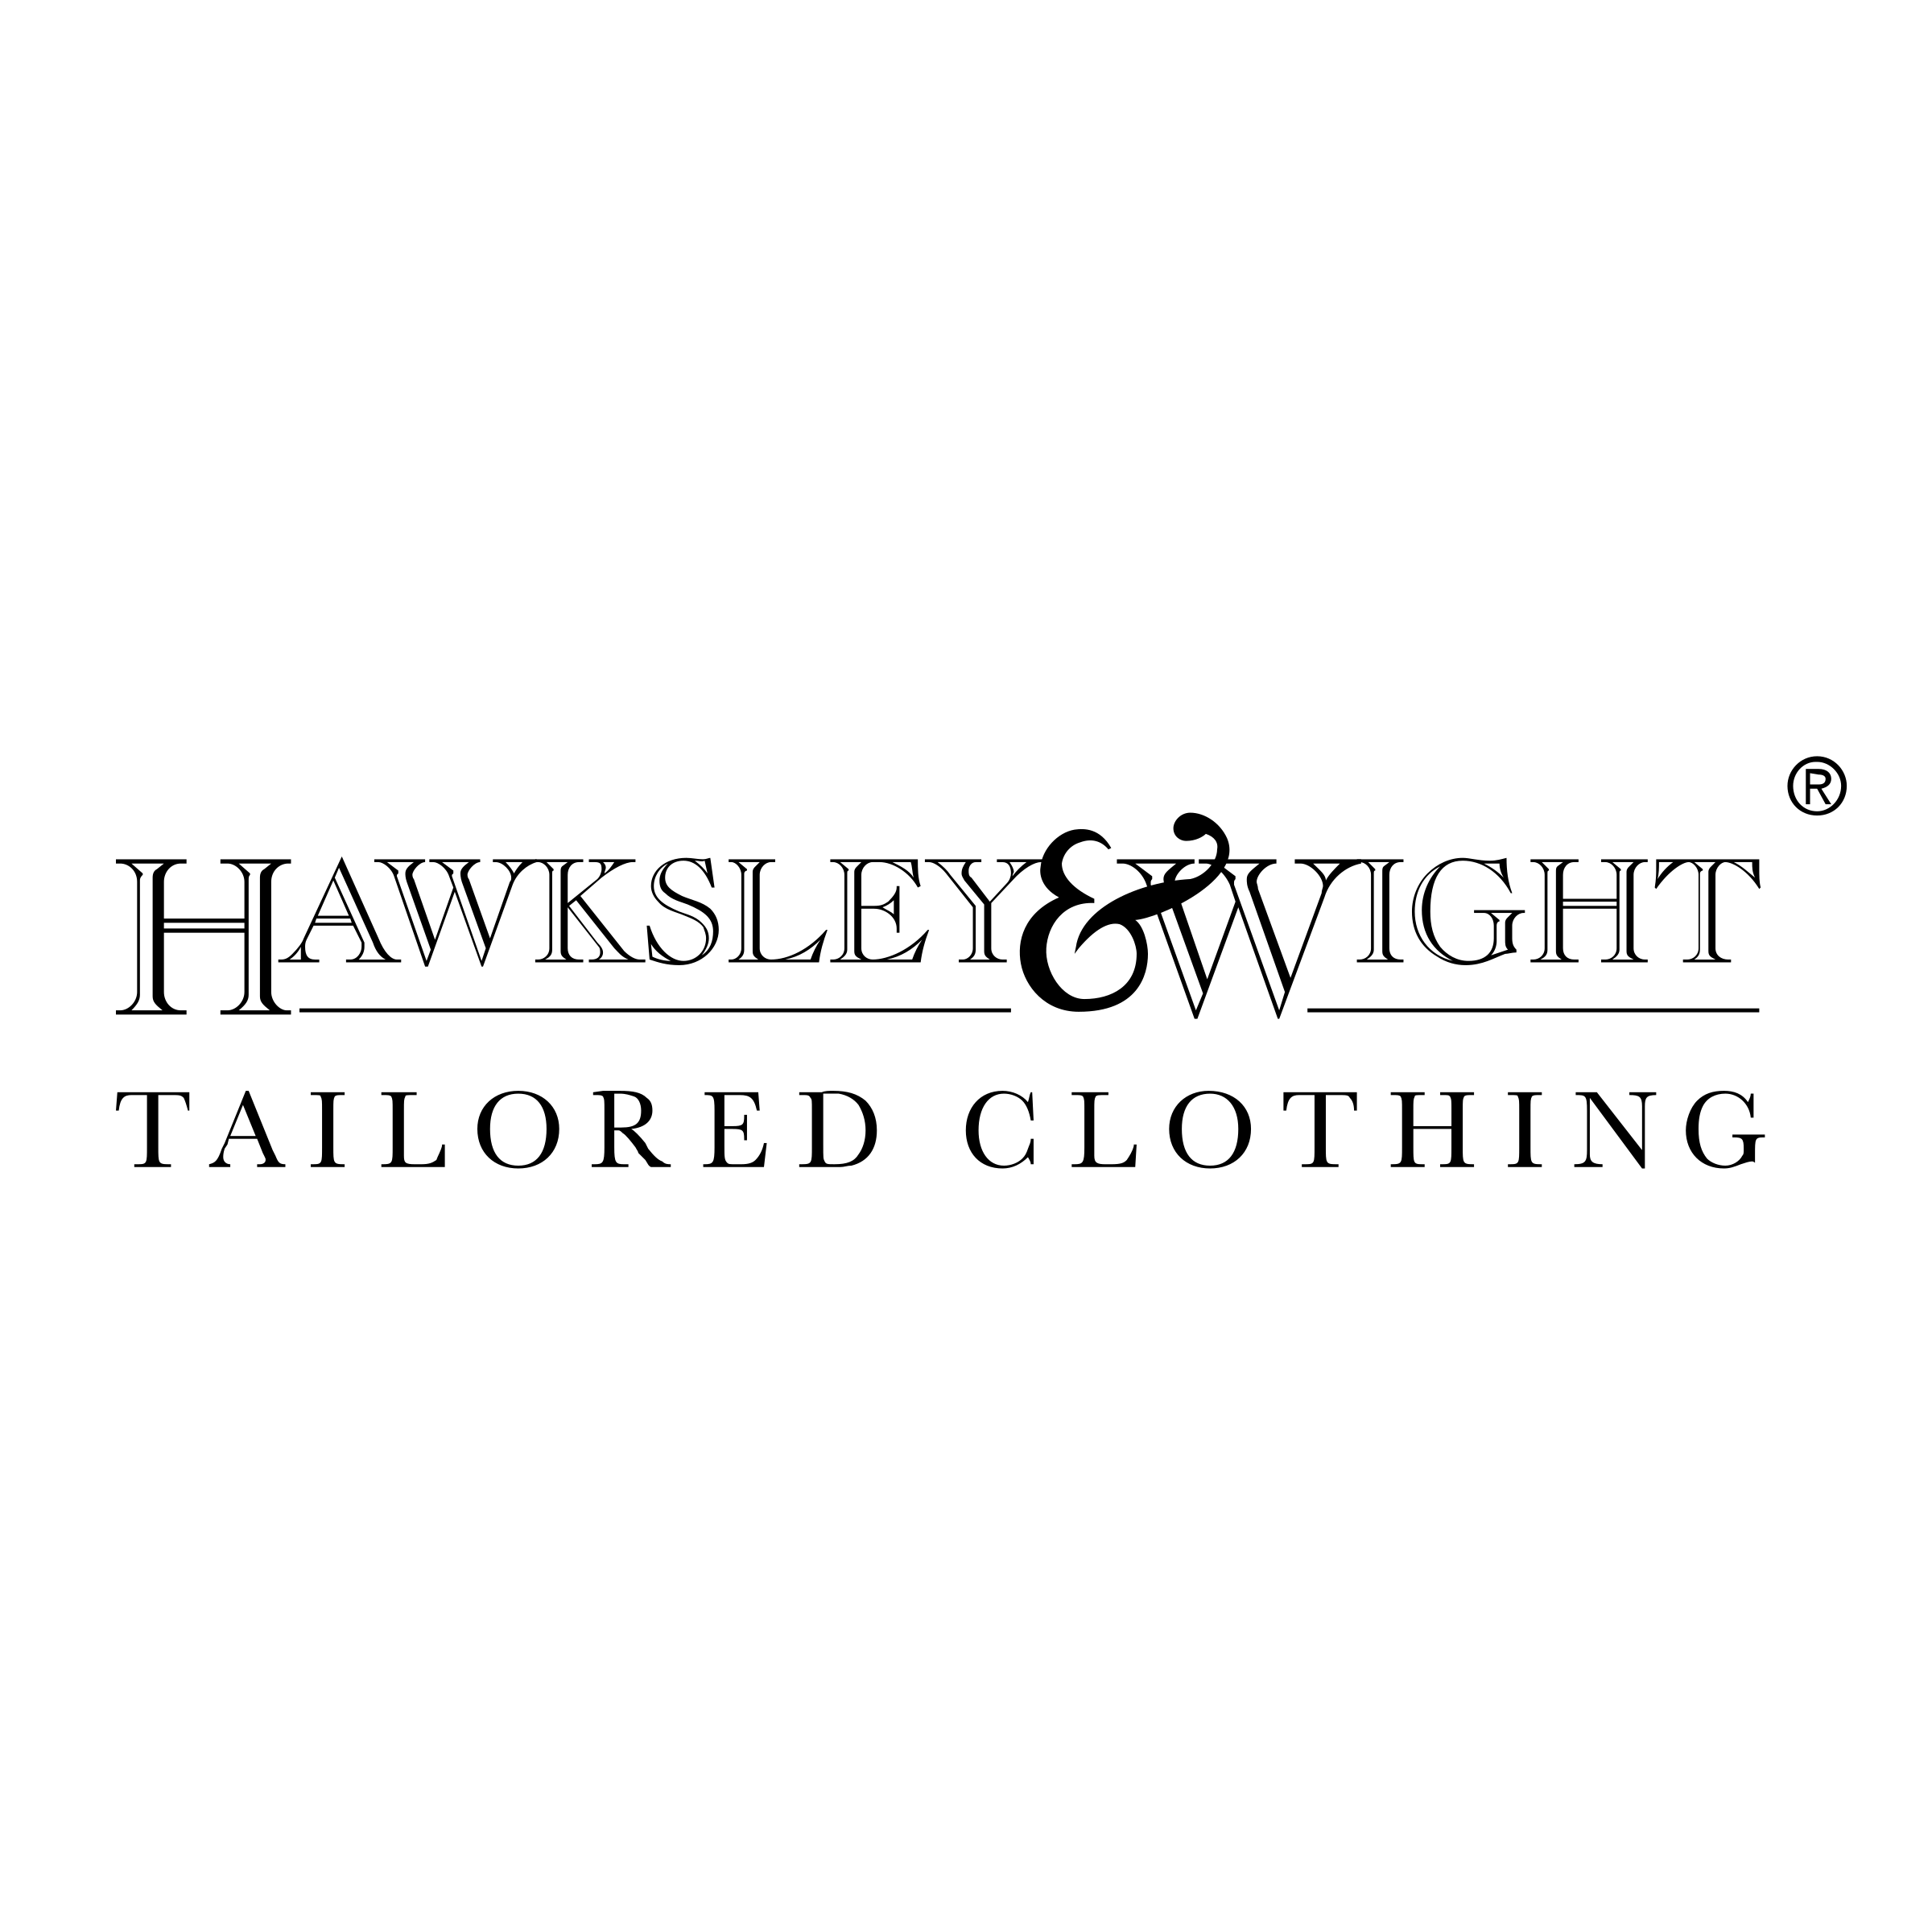 Black and Wight Logo - Hawksley & Wight Logo PNG Transparent & SVG Vector